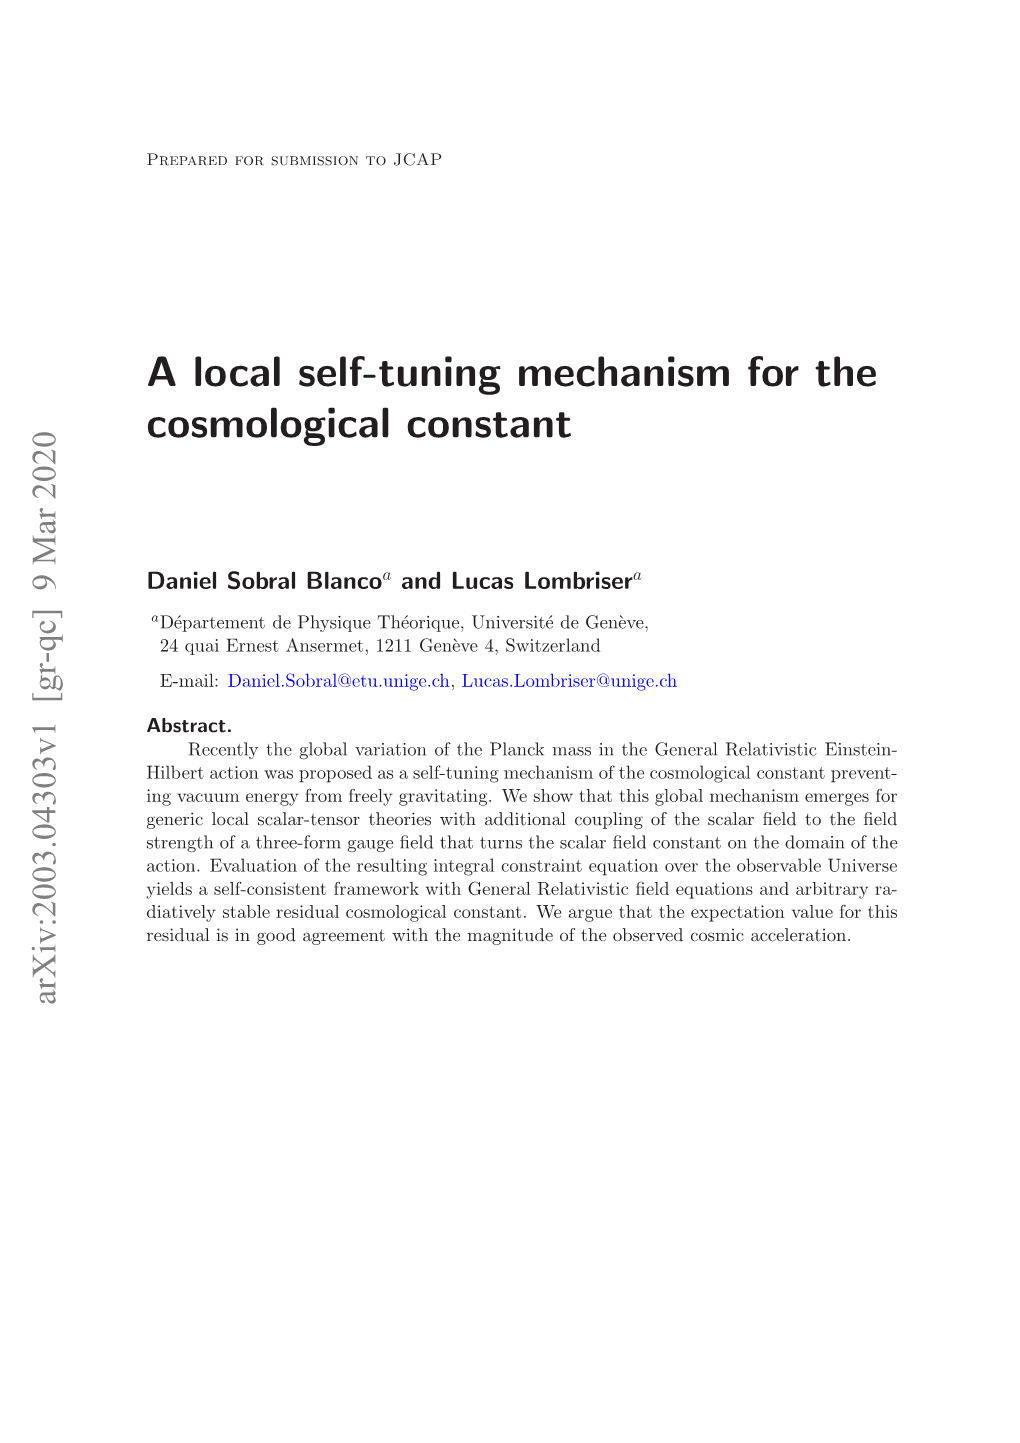 A Local Self-Tuning Mechanism for the Cosmological Constant